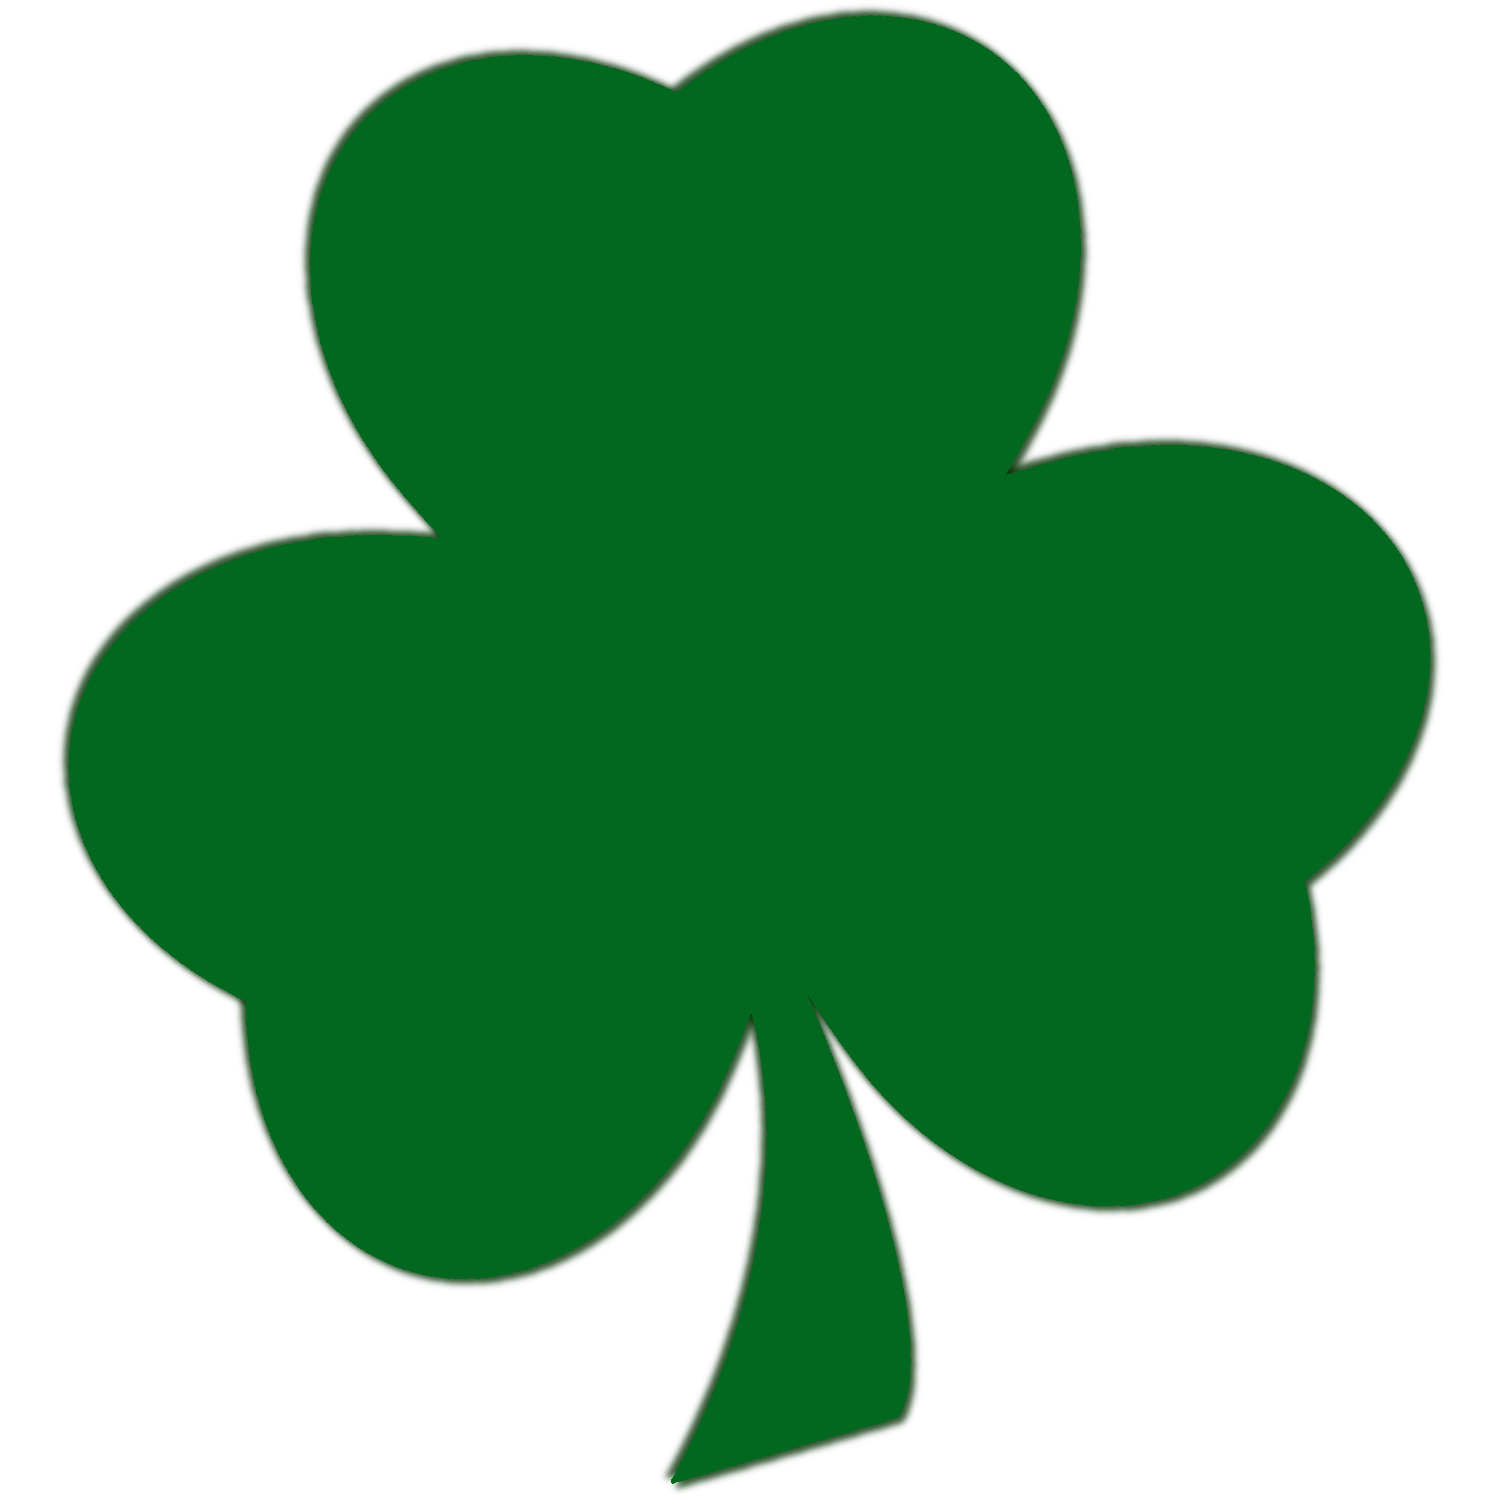 Clover Image PNG Image